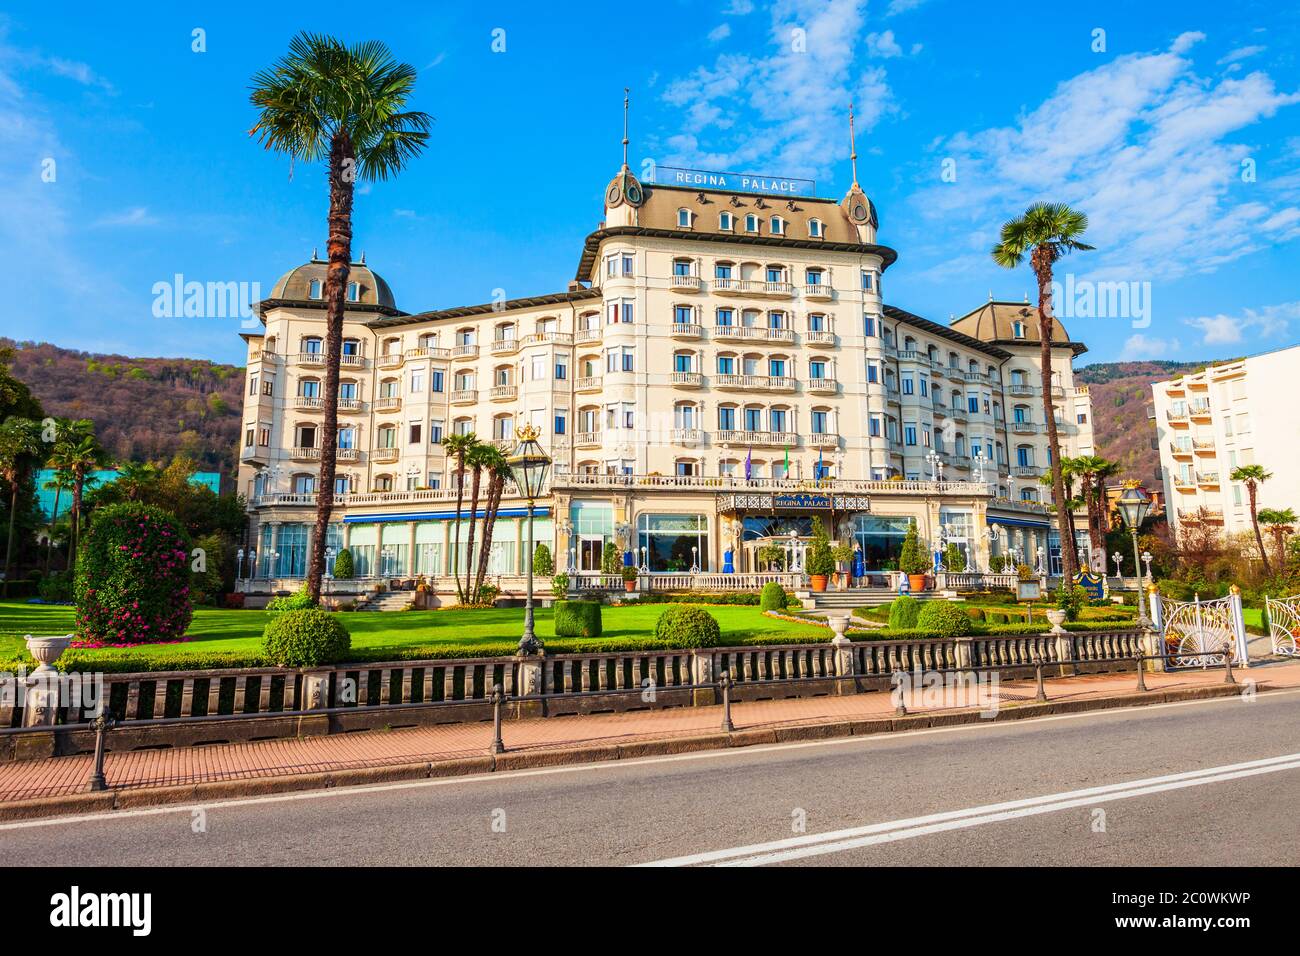 STRESA, ITALY - APRIL 10, 2019: Regina Palace Hotel in the centre of Stresa town located at the shores of Lago Maggiore Lake in northern Italy at suns Stock Photo